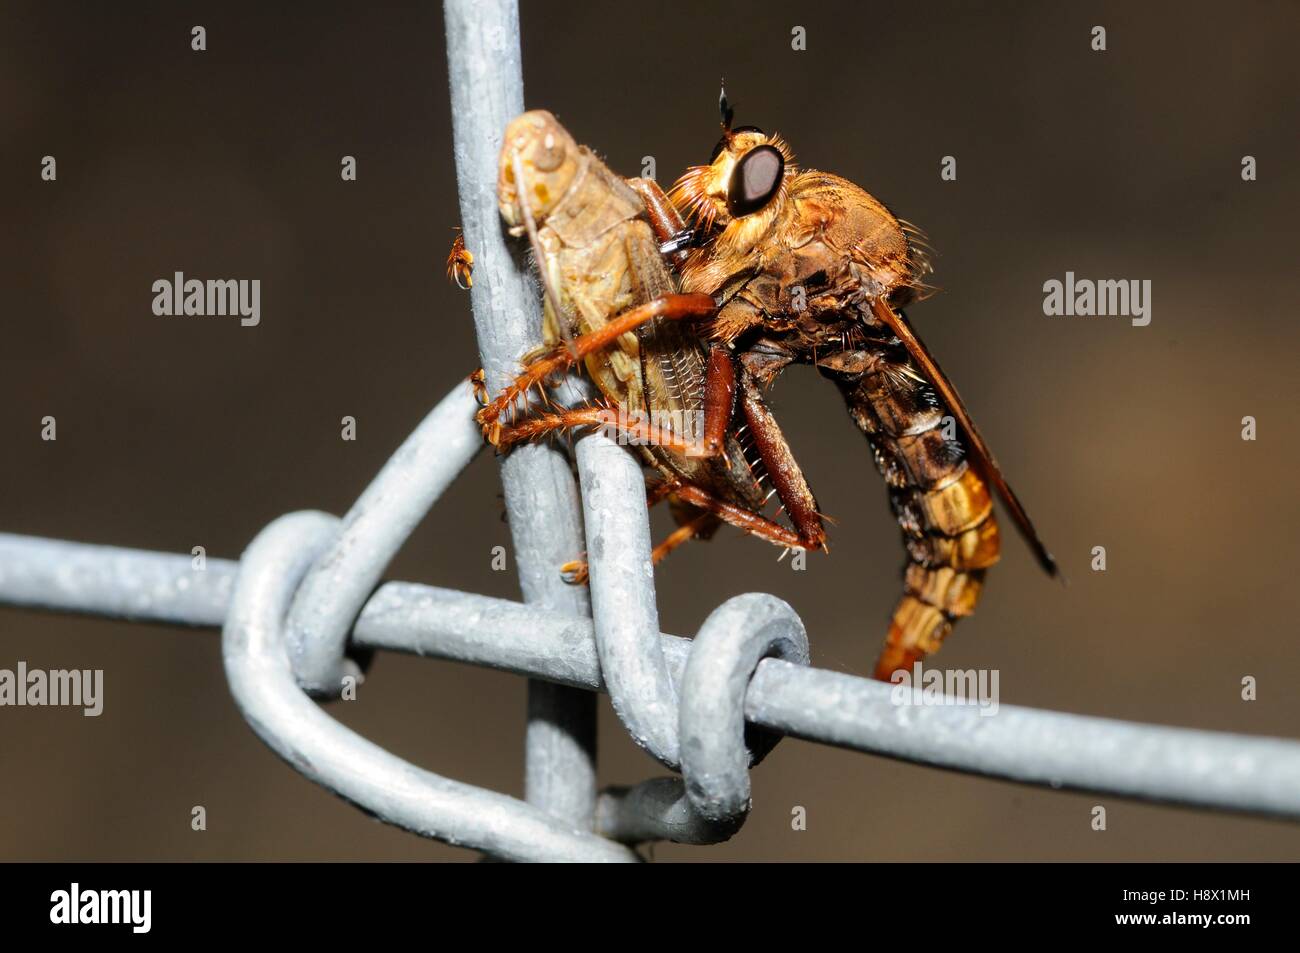 Hornet robberfly (Asilus crabroniformis) eating a grasshopper on a fence 2015 August 08 Northern Vosges Regional Nature Park Stock Photo